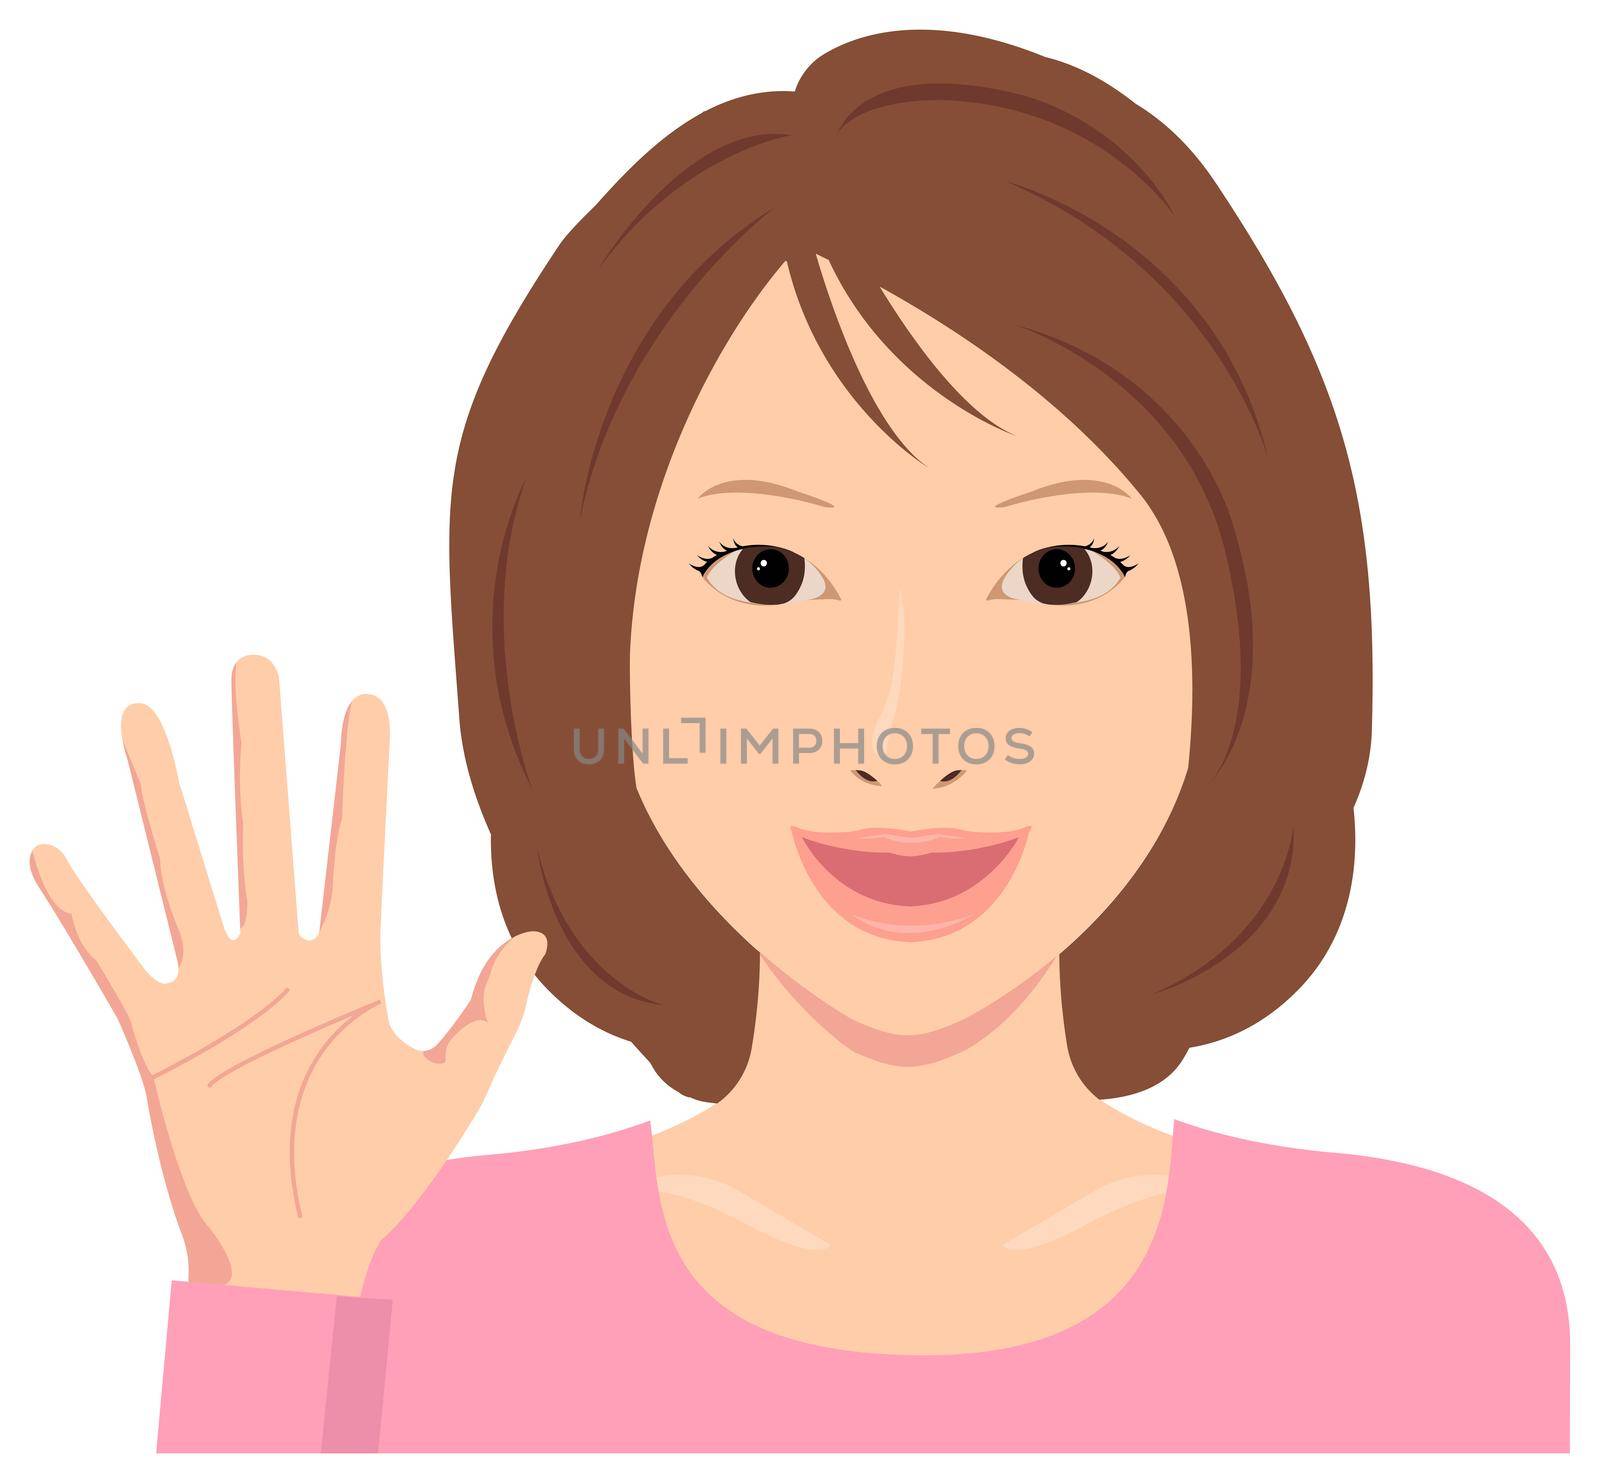 Young woman vector illustration / hand gesture and emotional face. by barks